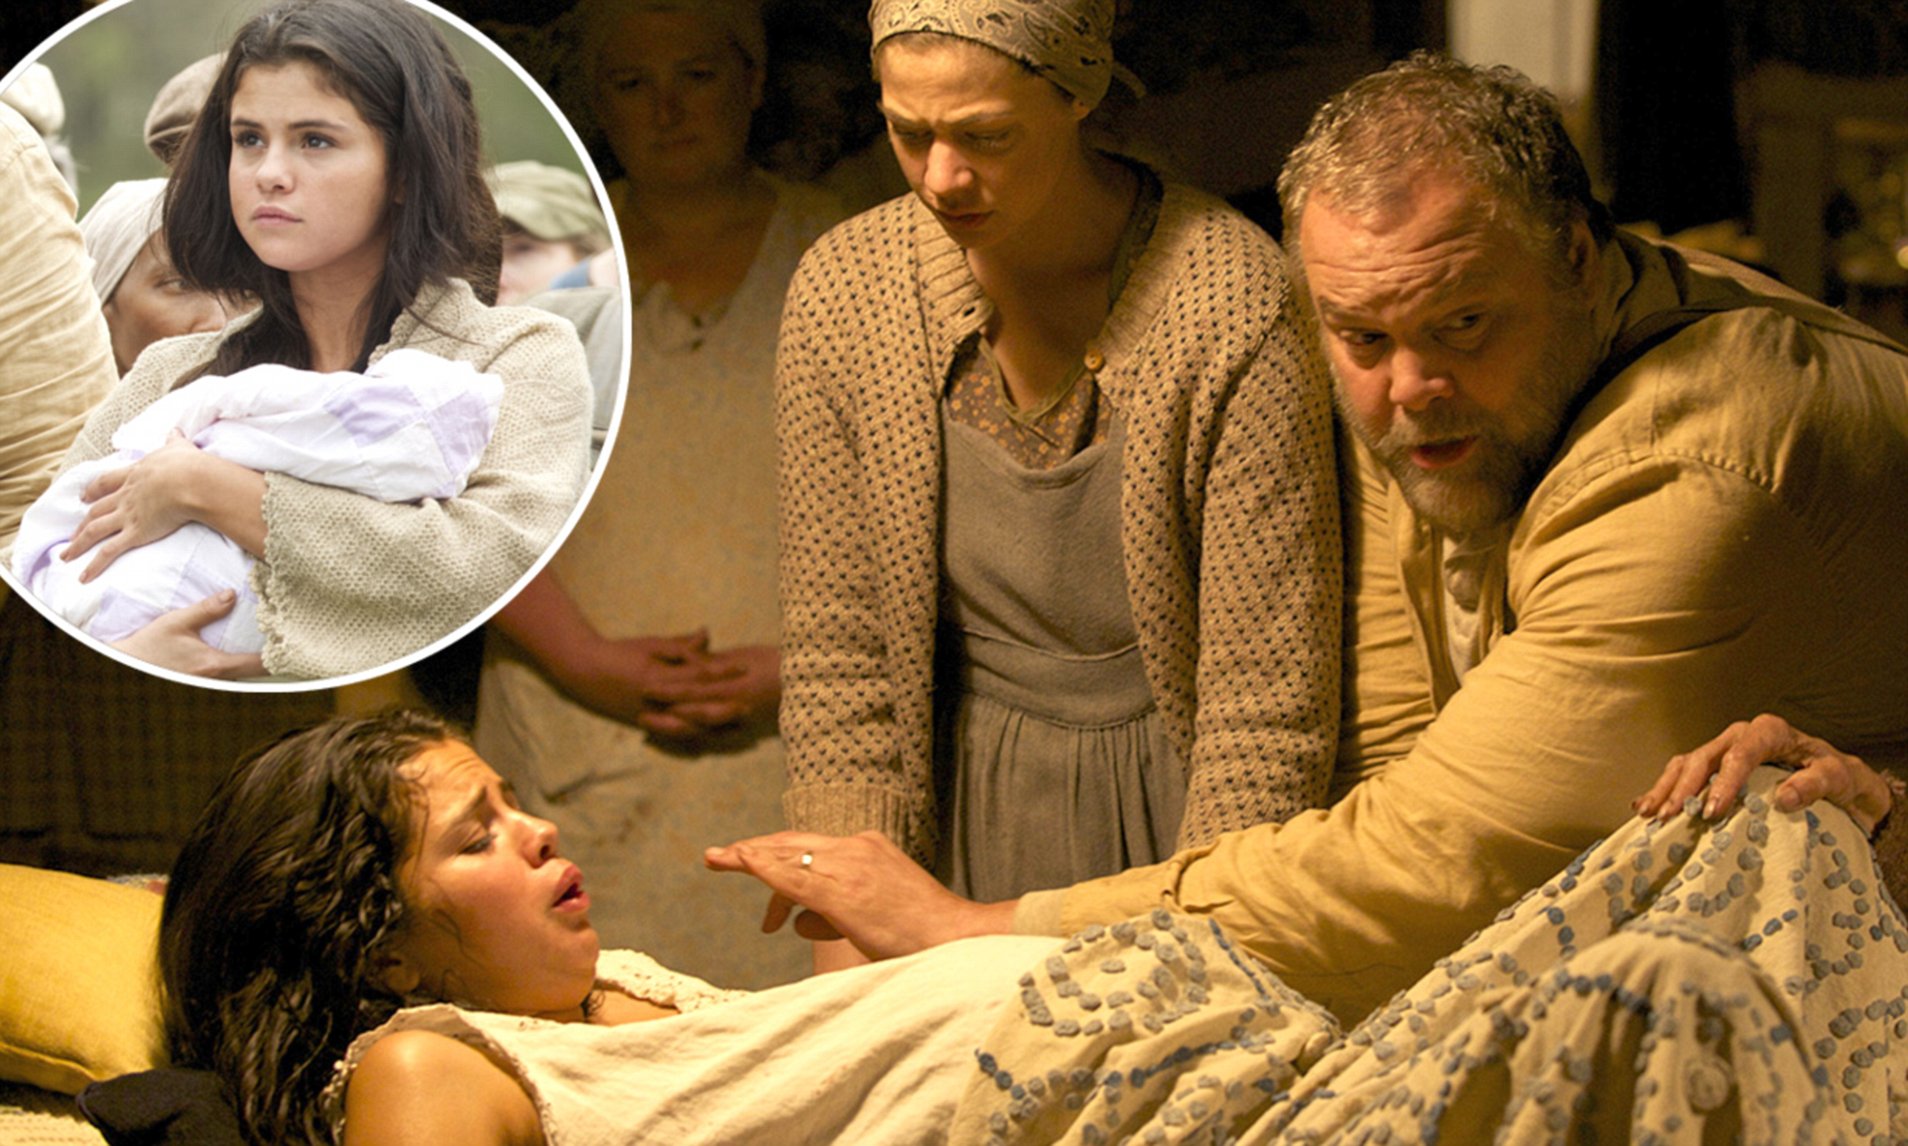 Selena Gomez gives birth in scene for In Dubious Battle | Daily Mail Online